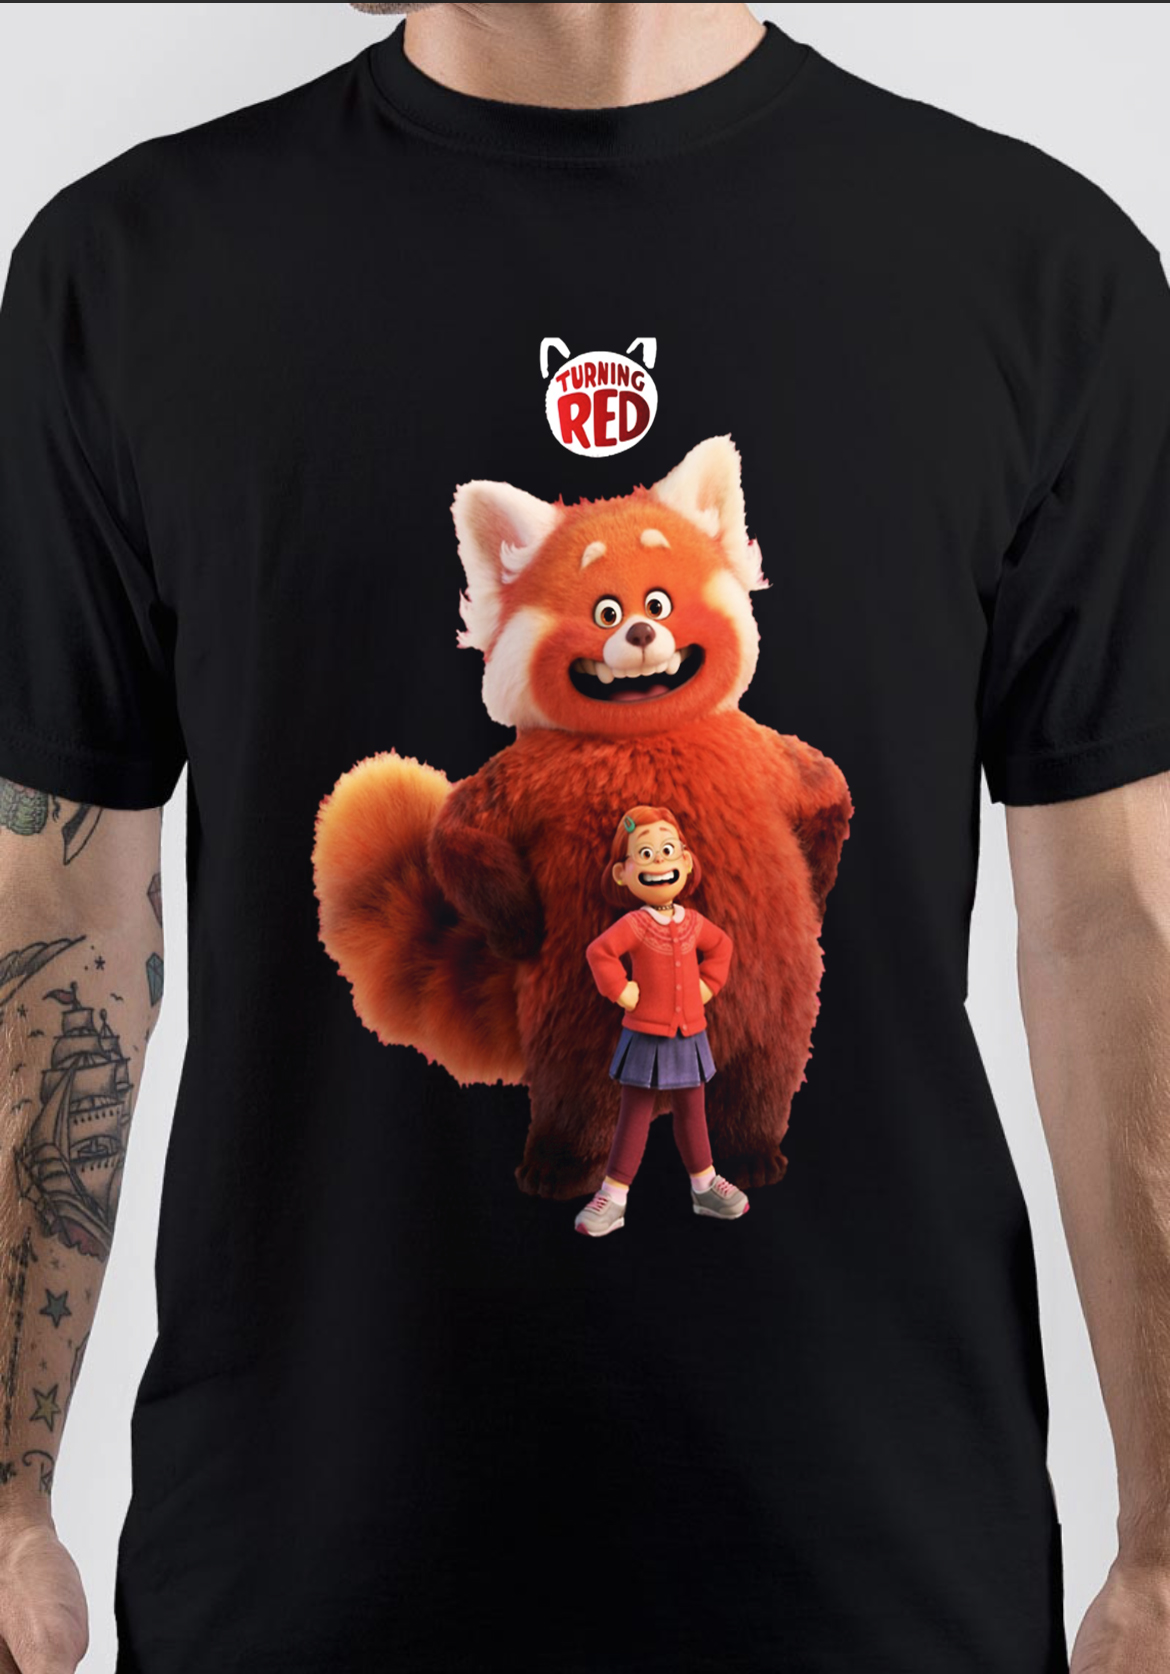 Turning Red T-Shirt And Merchandise